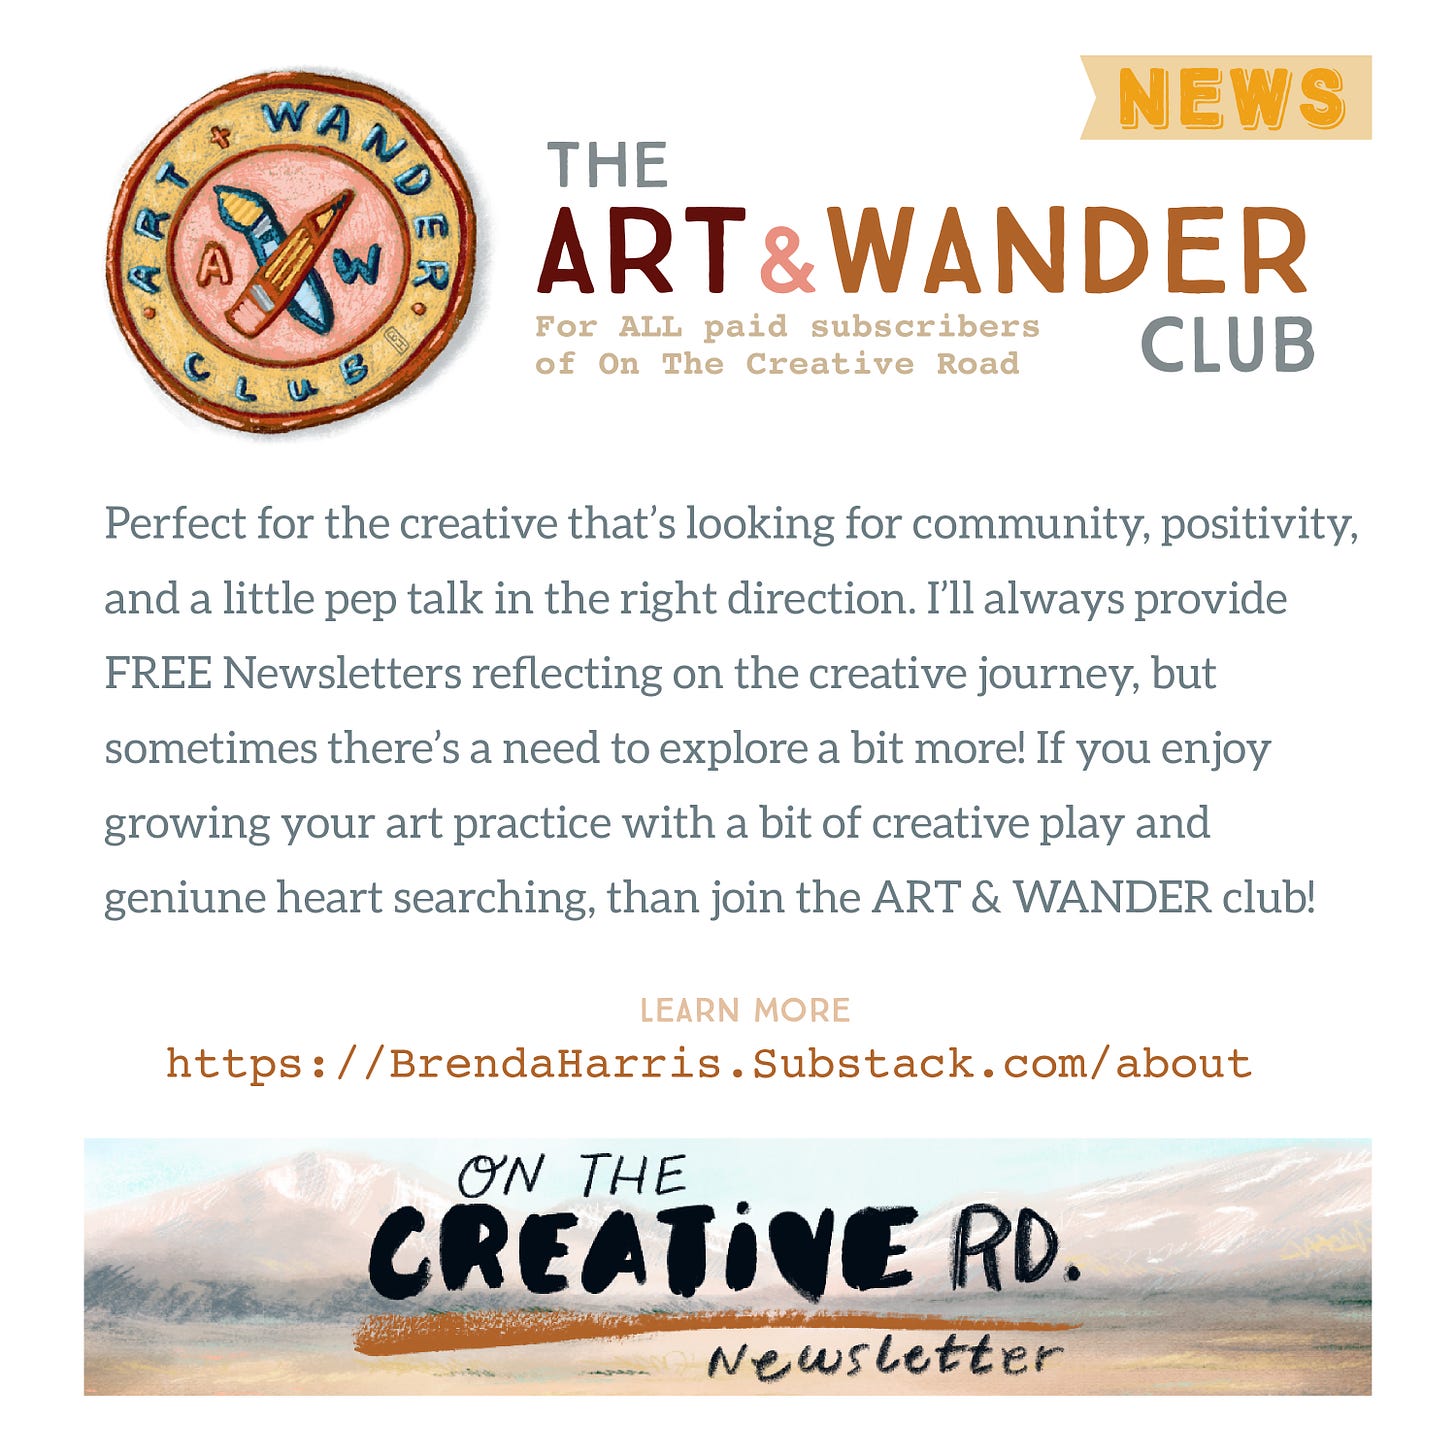 The ART & WANDER Club      { For ALL paid subscribers }   Perfect for the creative that’s looking for community, positivity, and a little push in the right direction. I’ll always provide FREE Newsletters that are written from the heart, but sometimes there’s a need to explore a bit more. Reflect a bit longer and celebrate the creative journey. If you want to grow and explore with me, than join the ART & WANDER club!